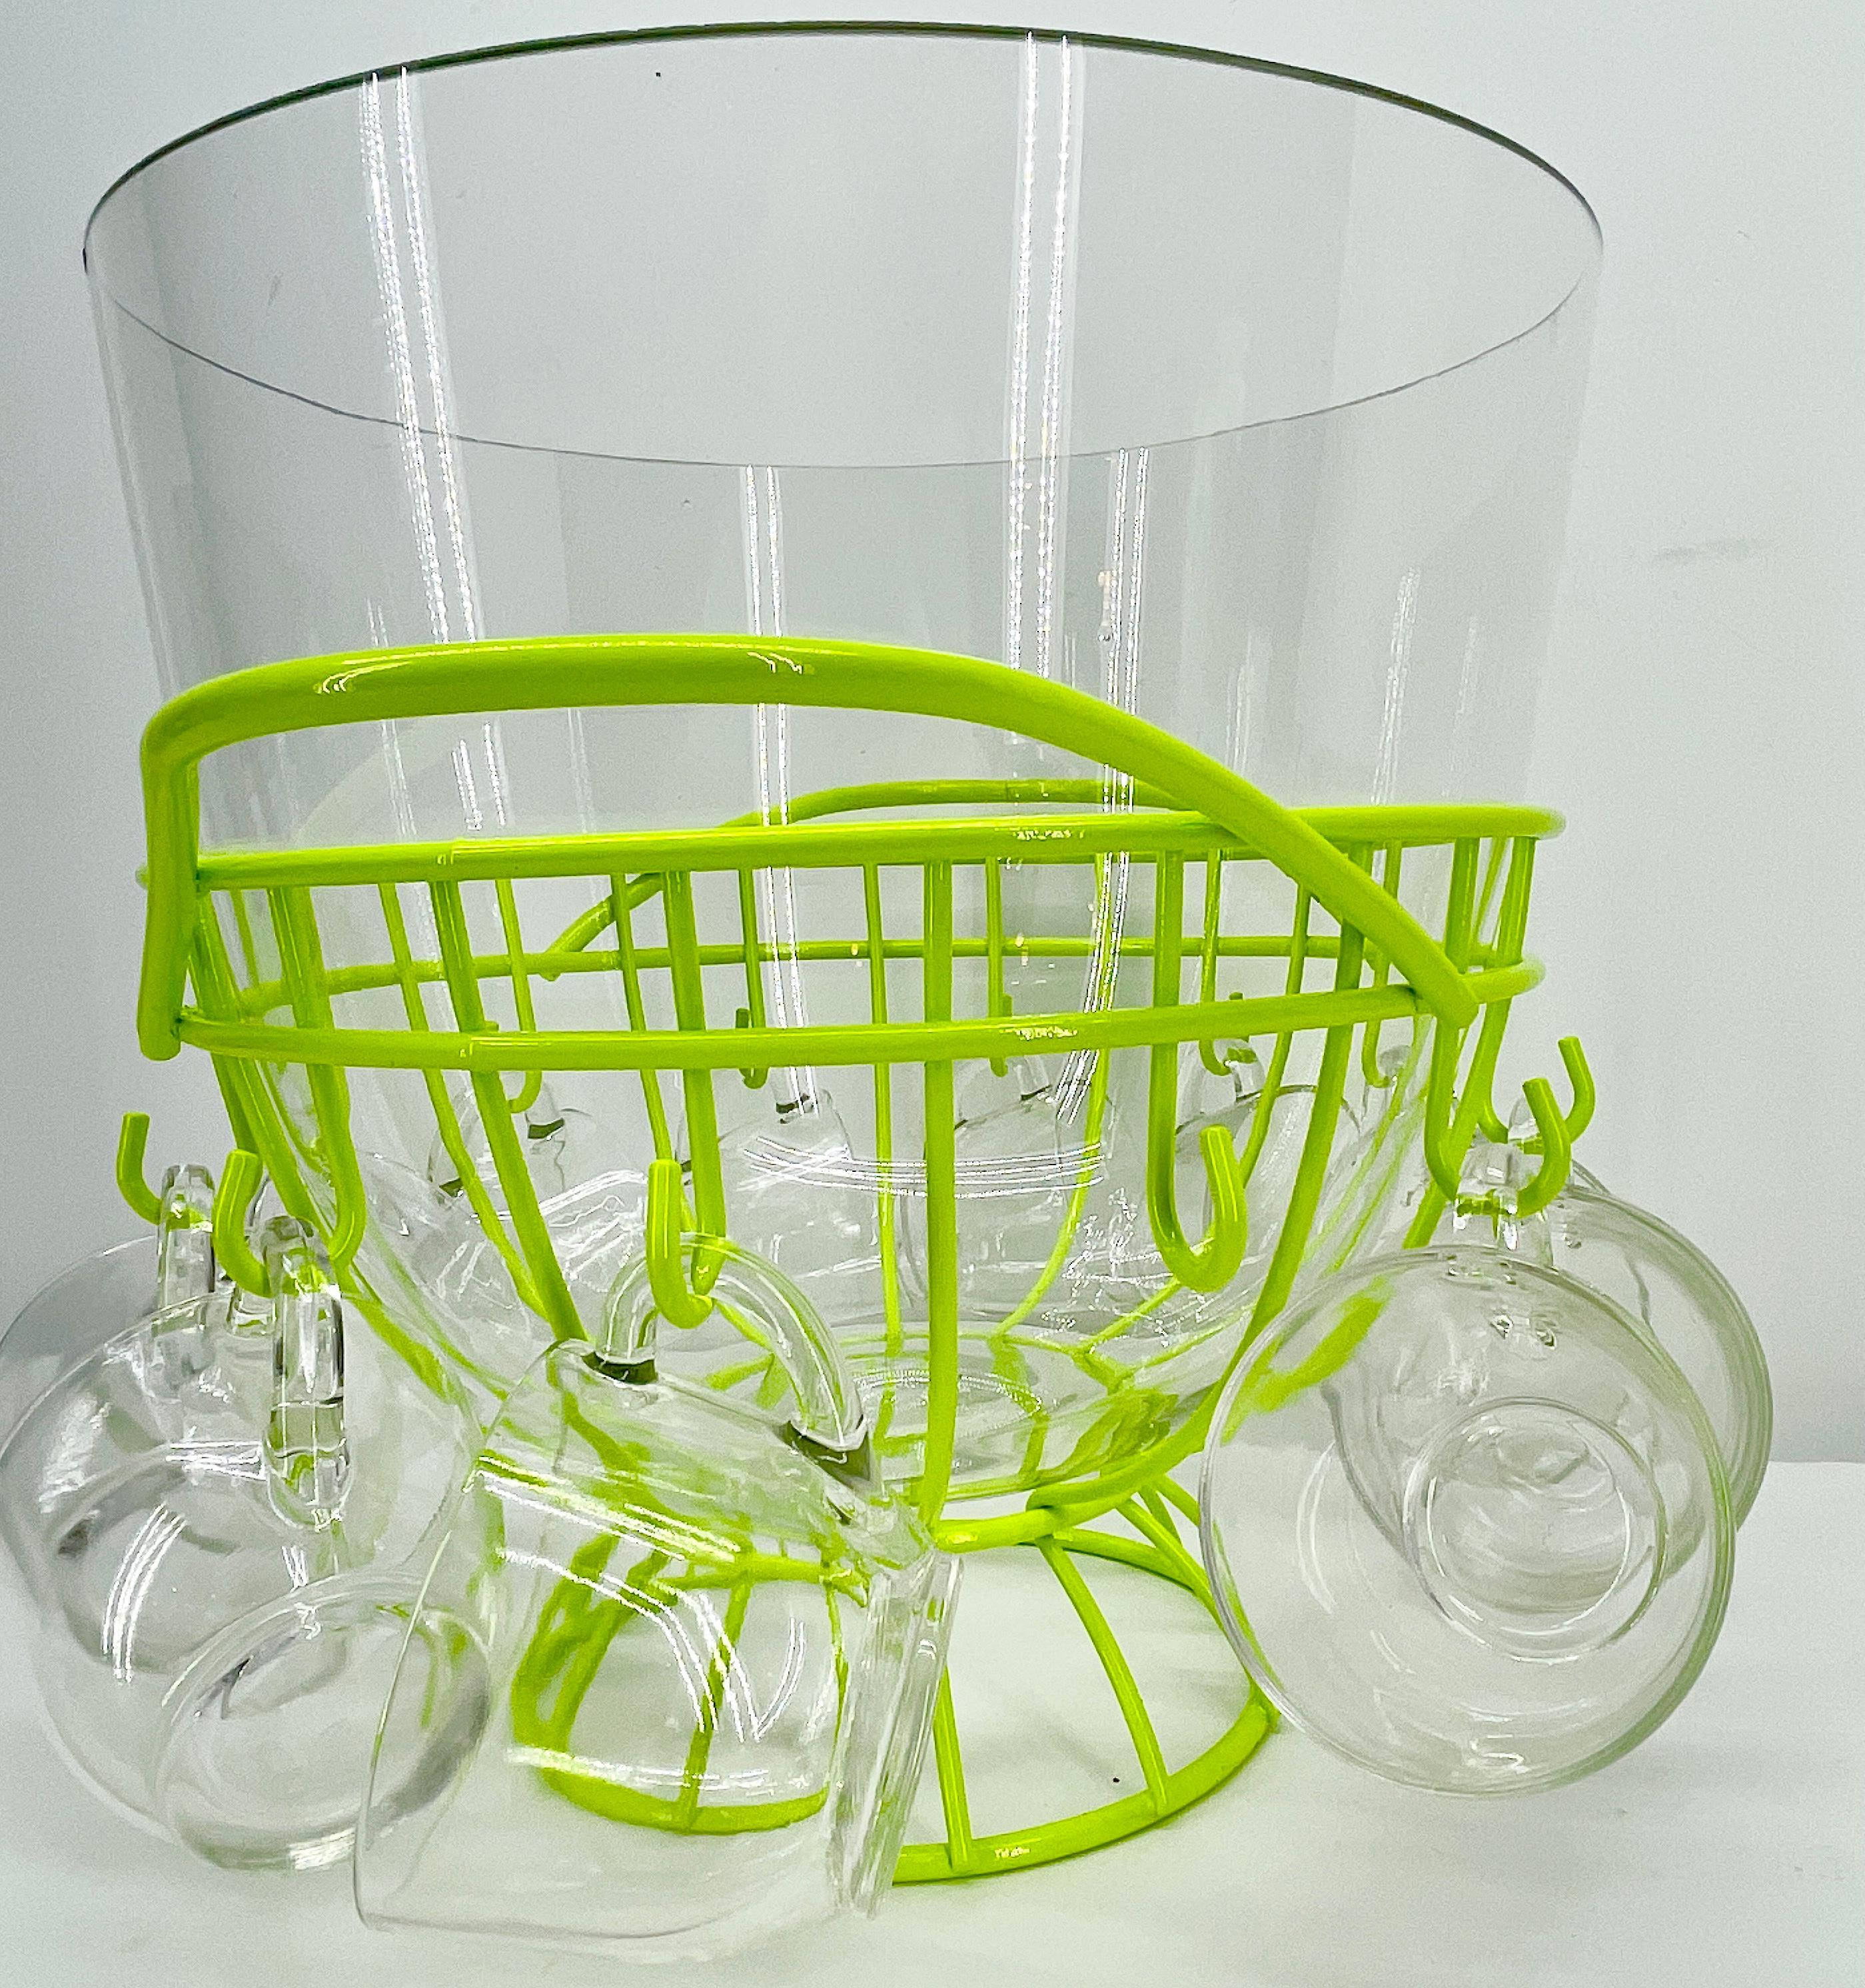 Metal Mid-Century Modern Punch Bowl Set, Powder Coated Caddy Chartreuse